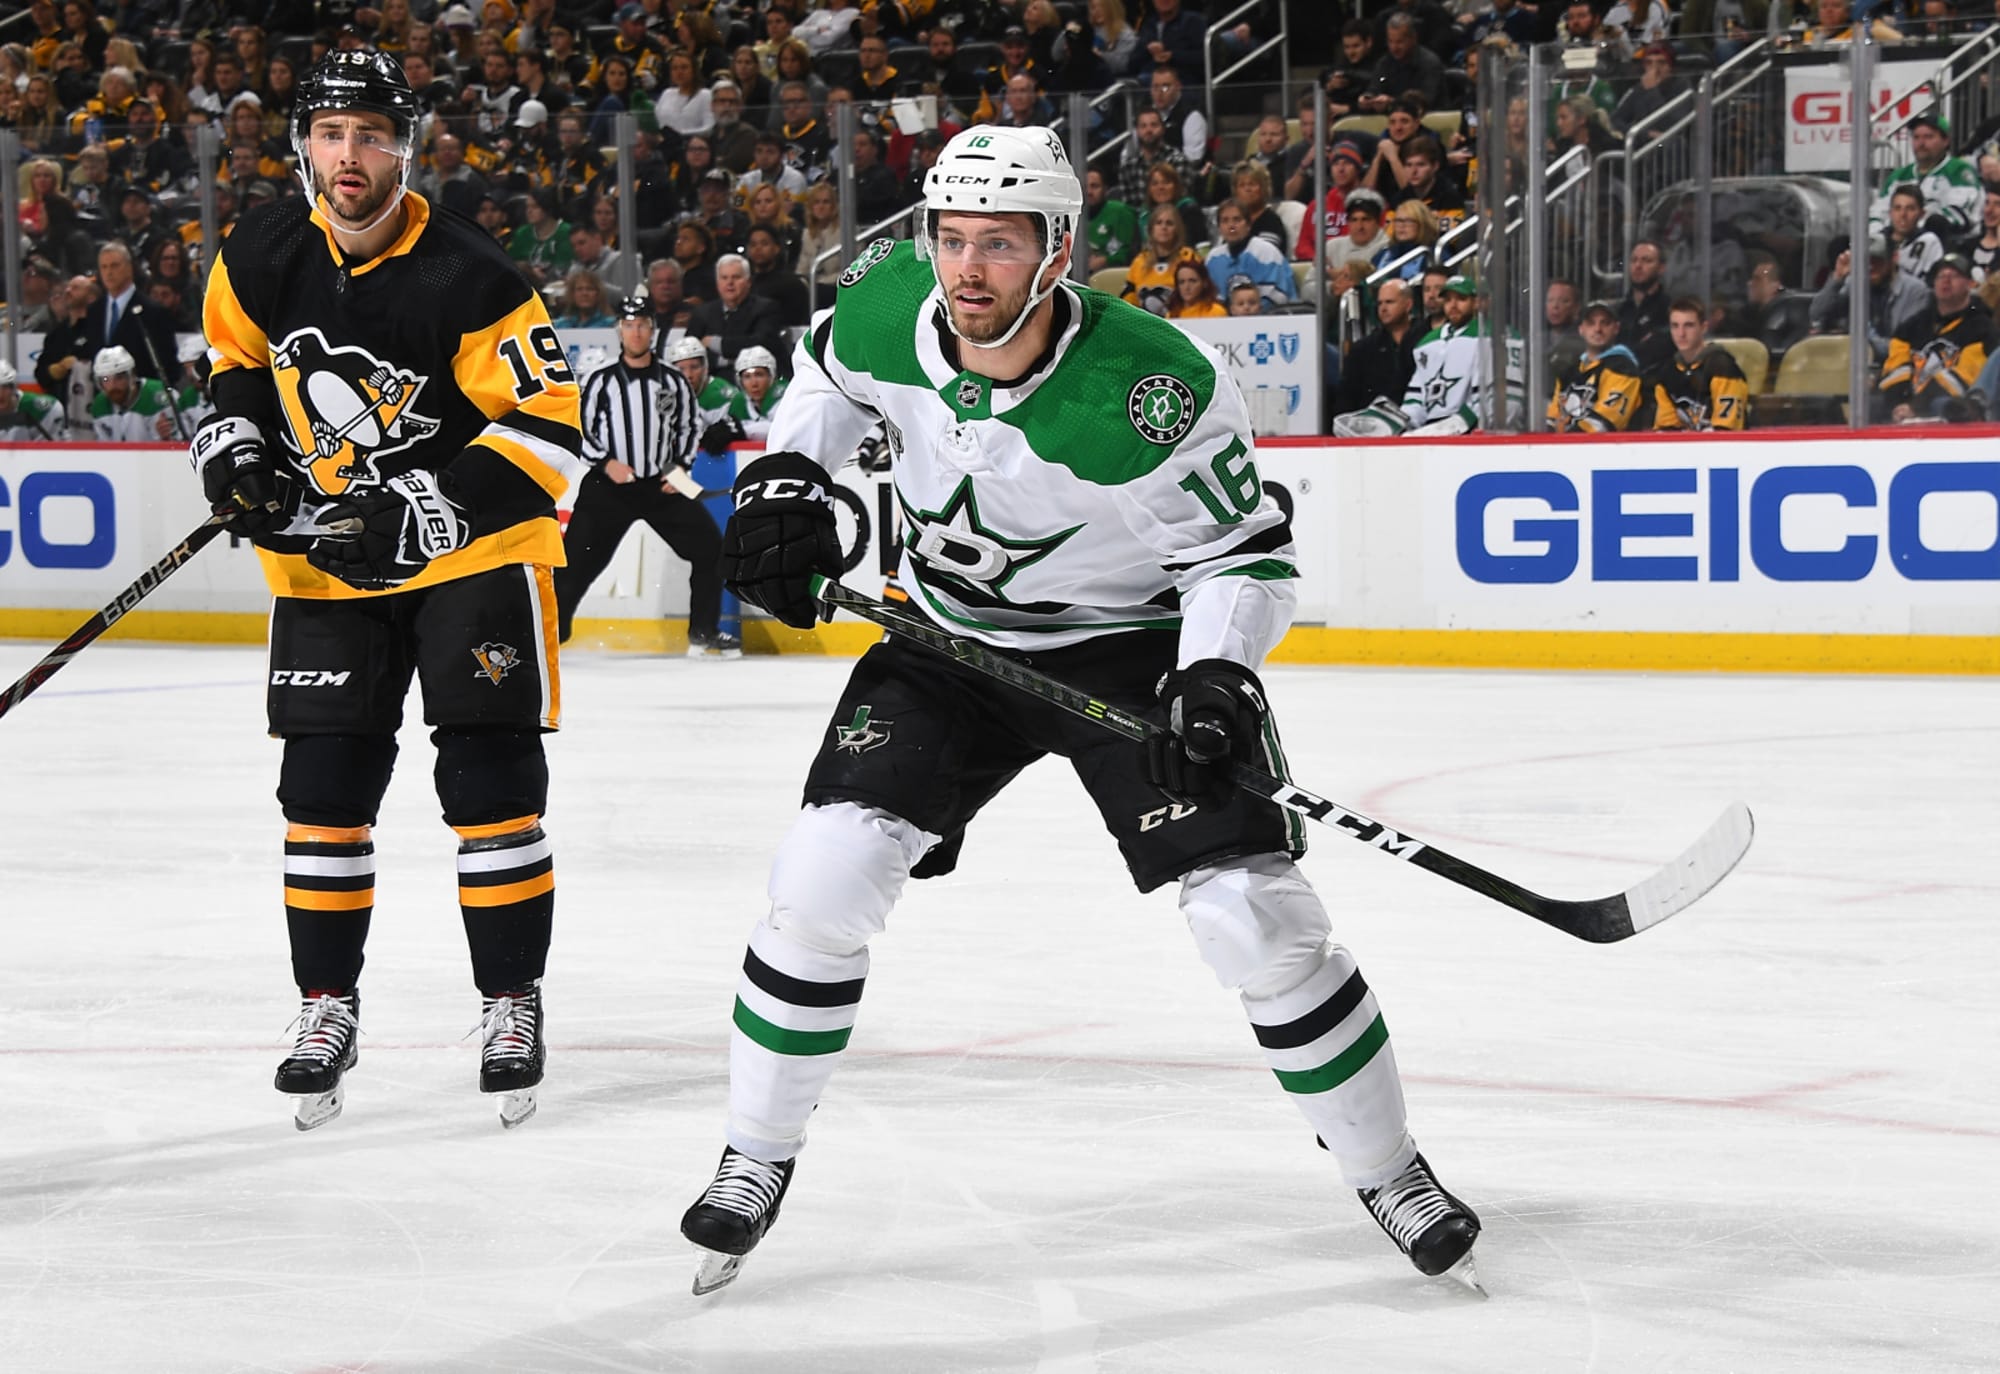 Dallas Stars at Pittsburgh Penguins Game Info, Broadcast, Lines, Injuries